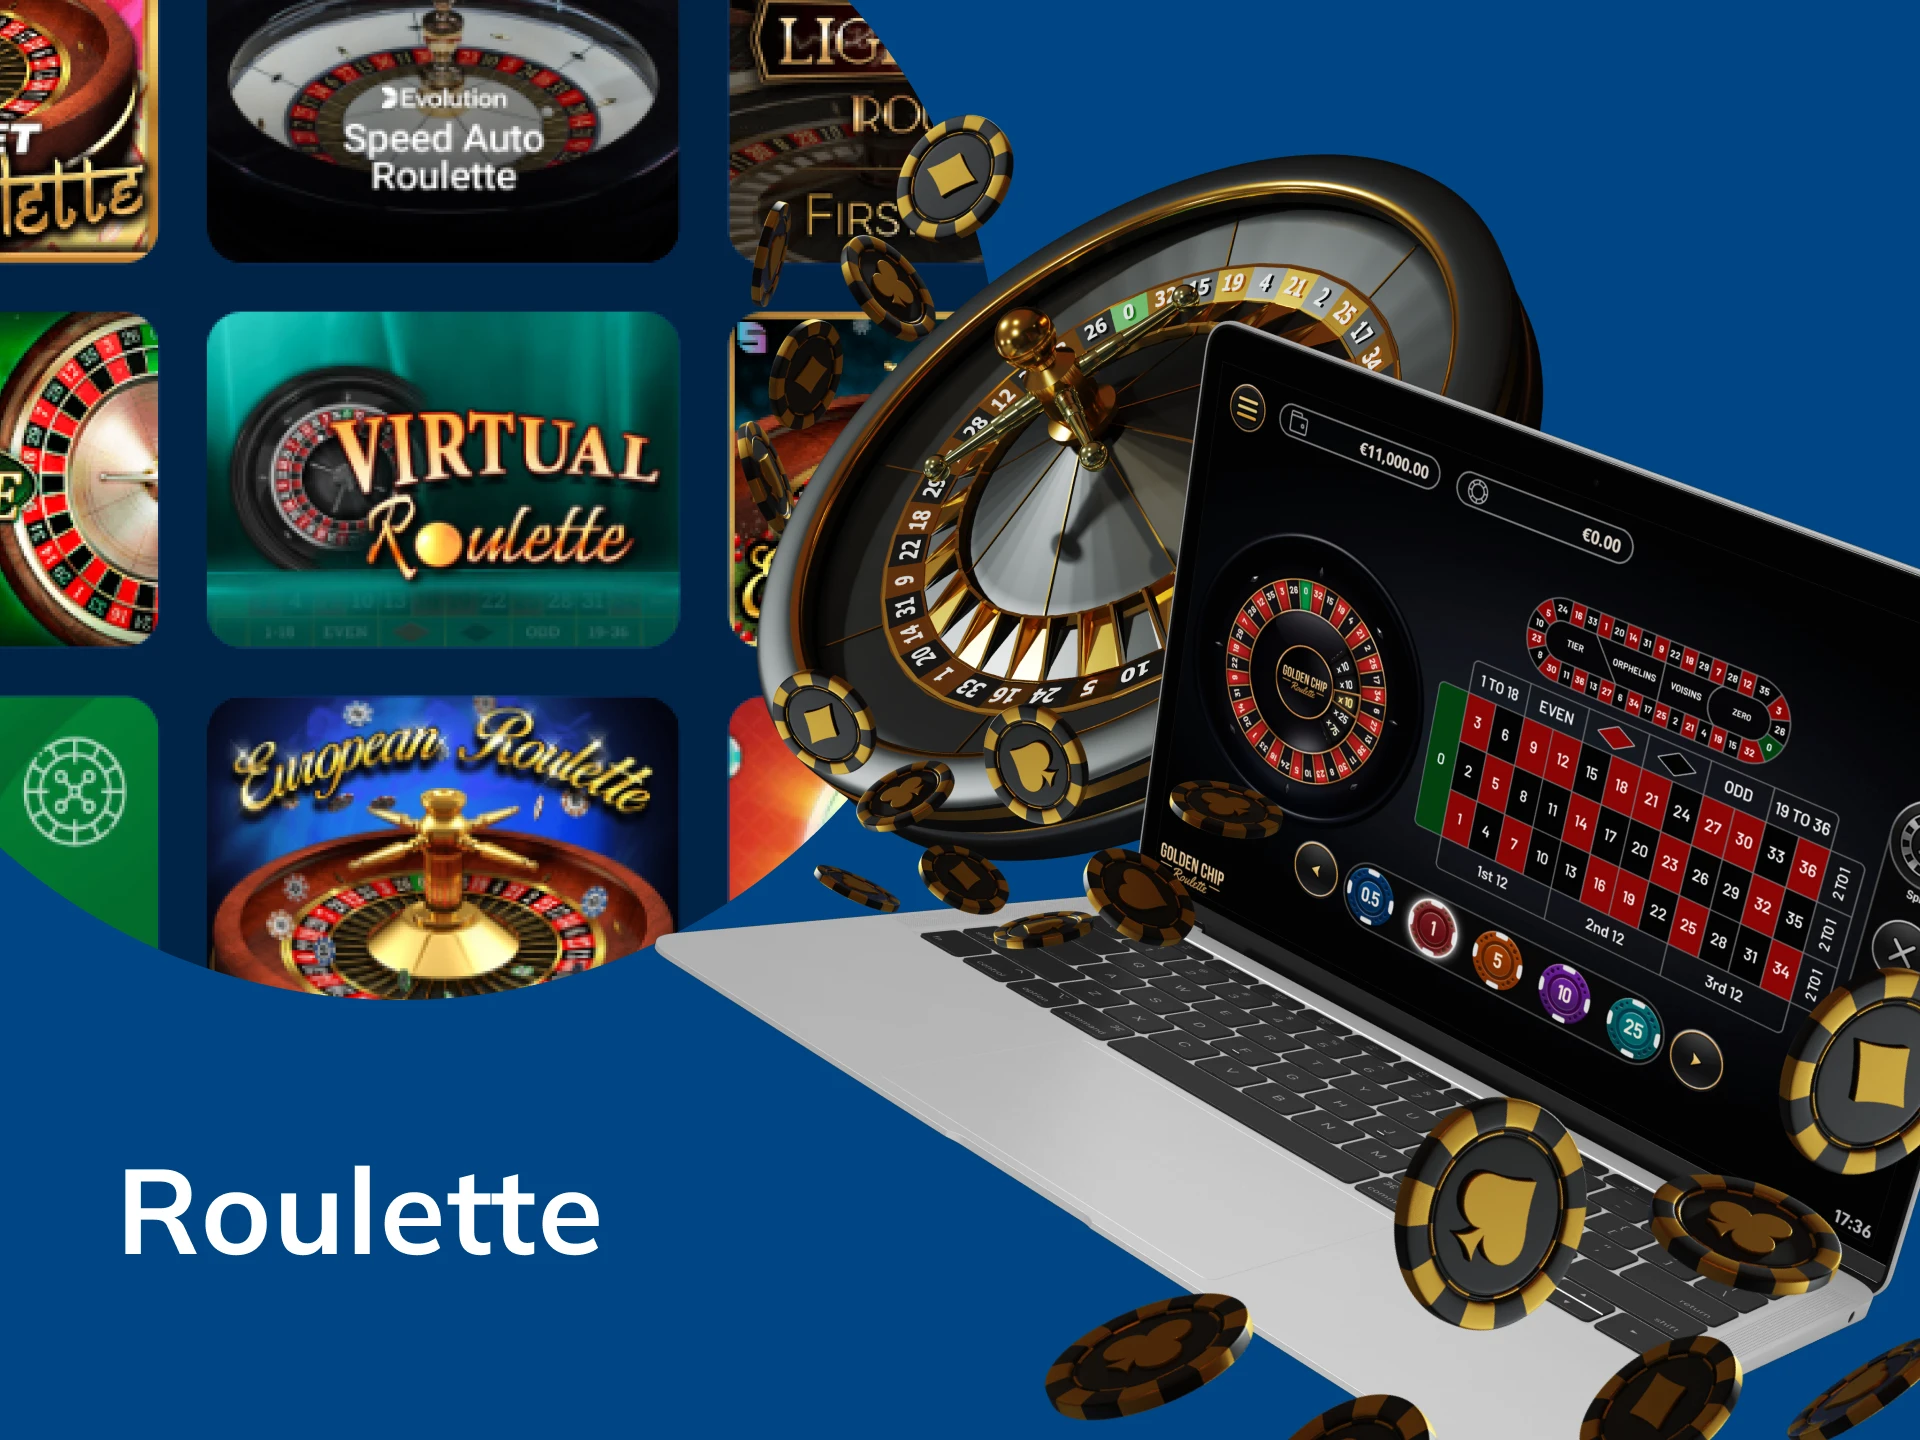 Try your luck in the game of roulette.